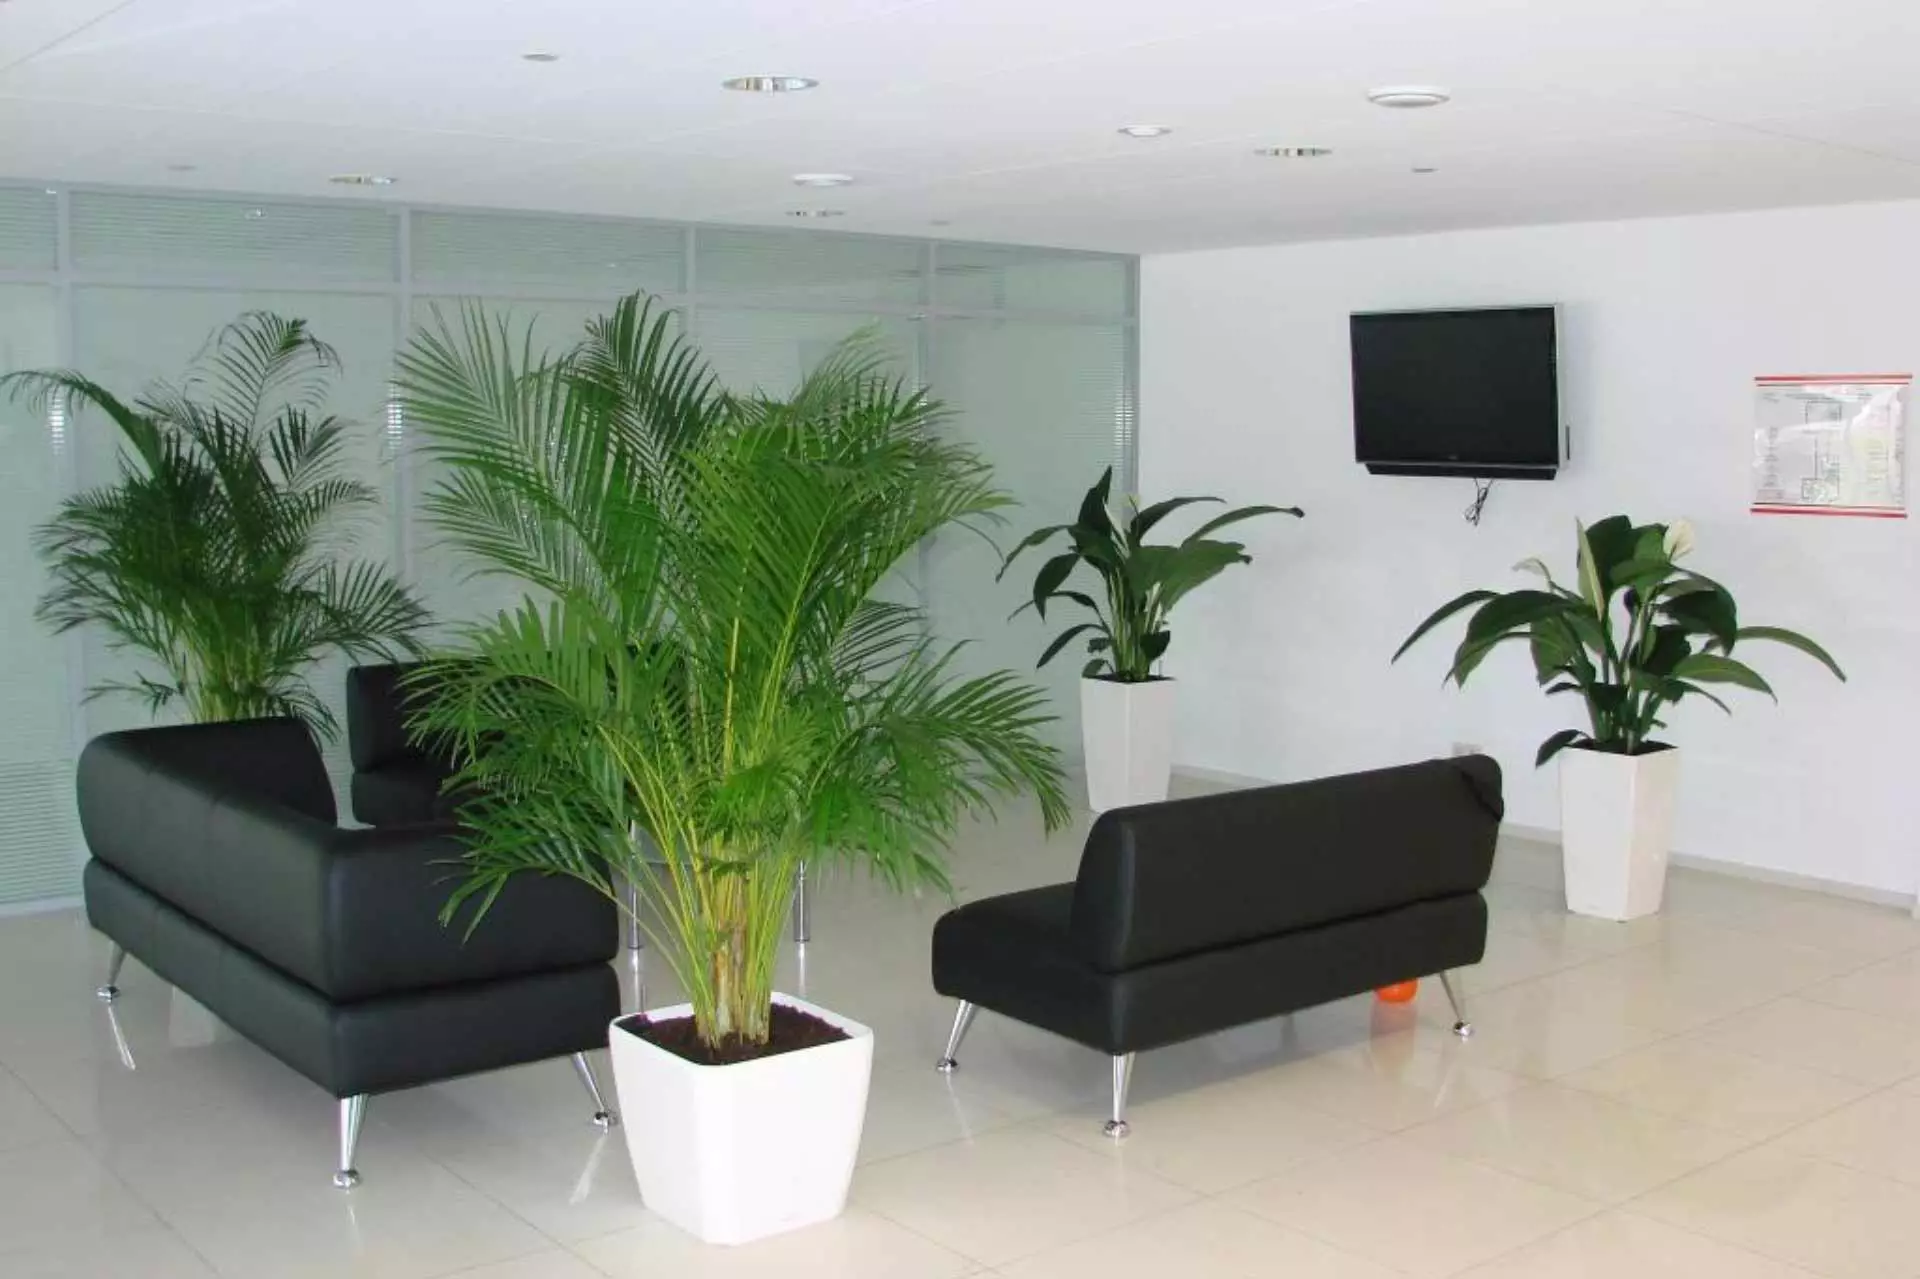 Phytodesign in the interior